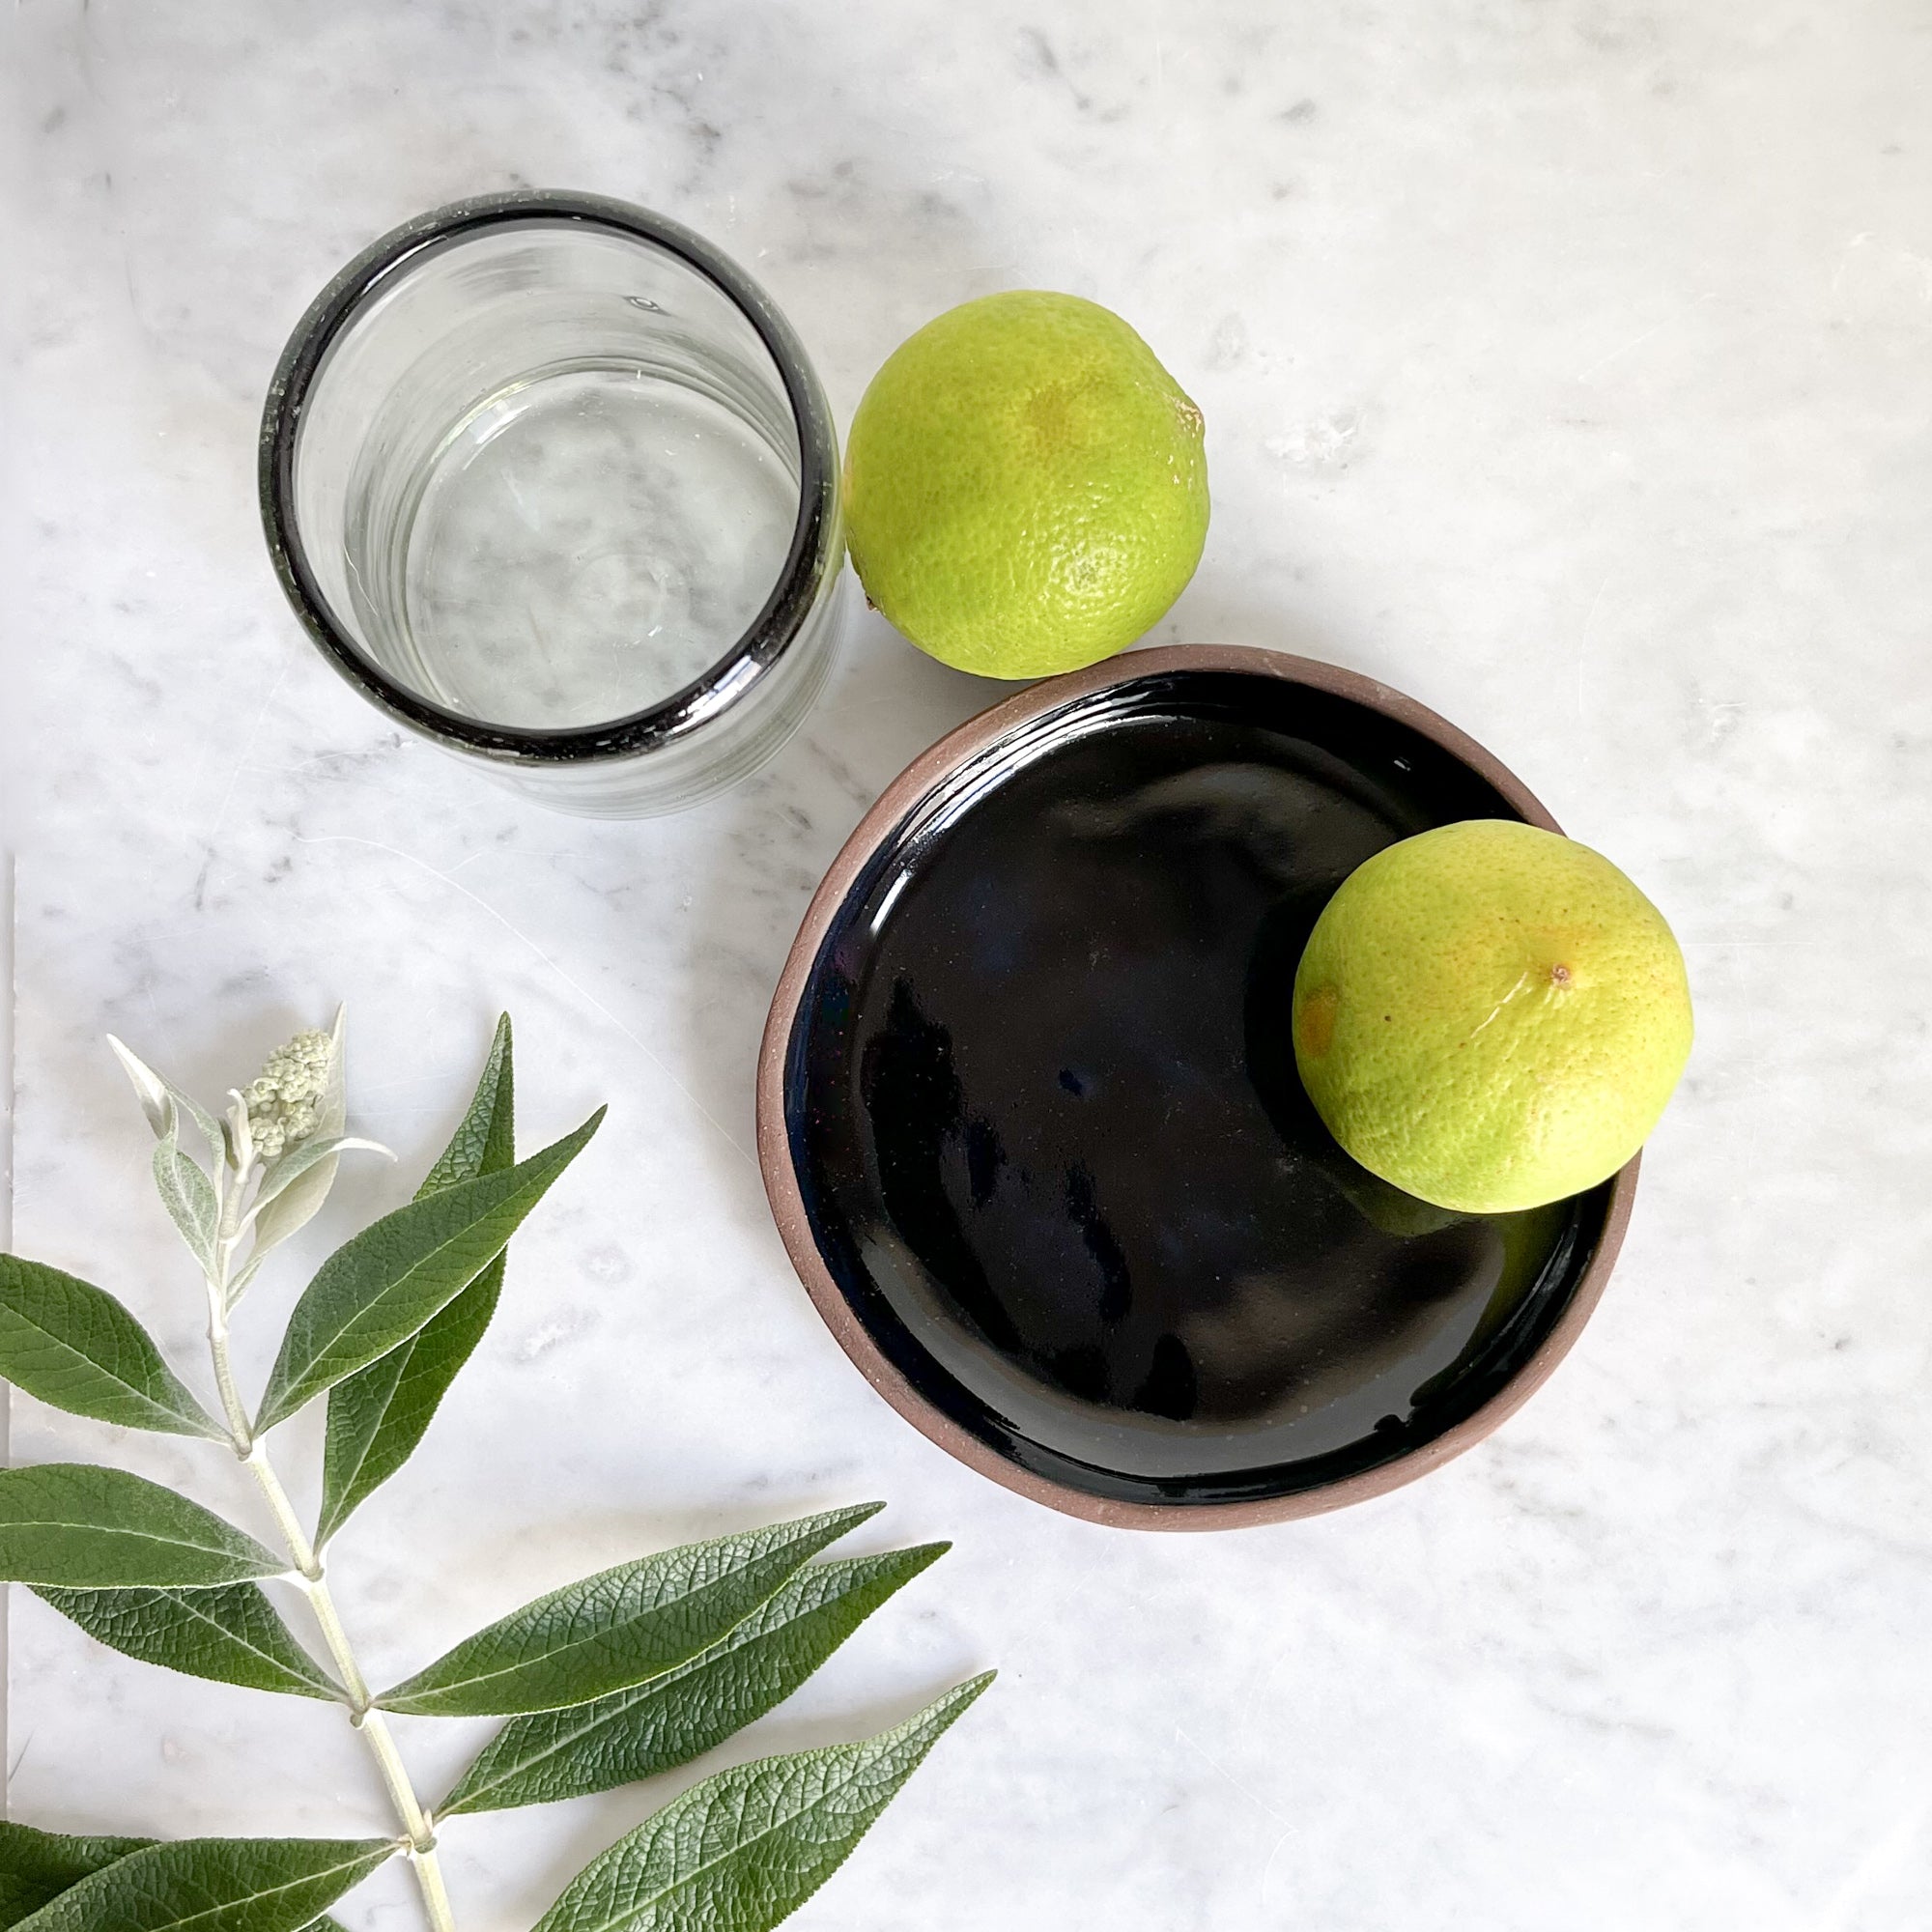 A black terra-cotta plate with limes, next to a small black-rimmed glass.